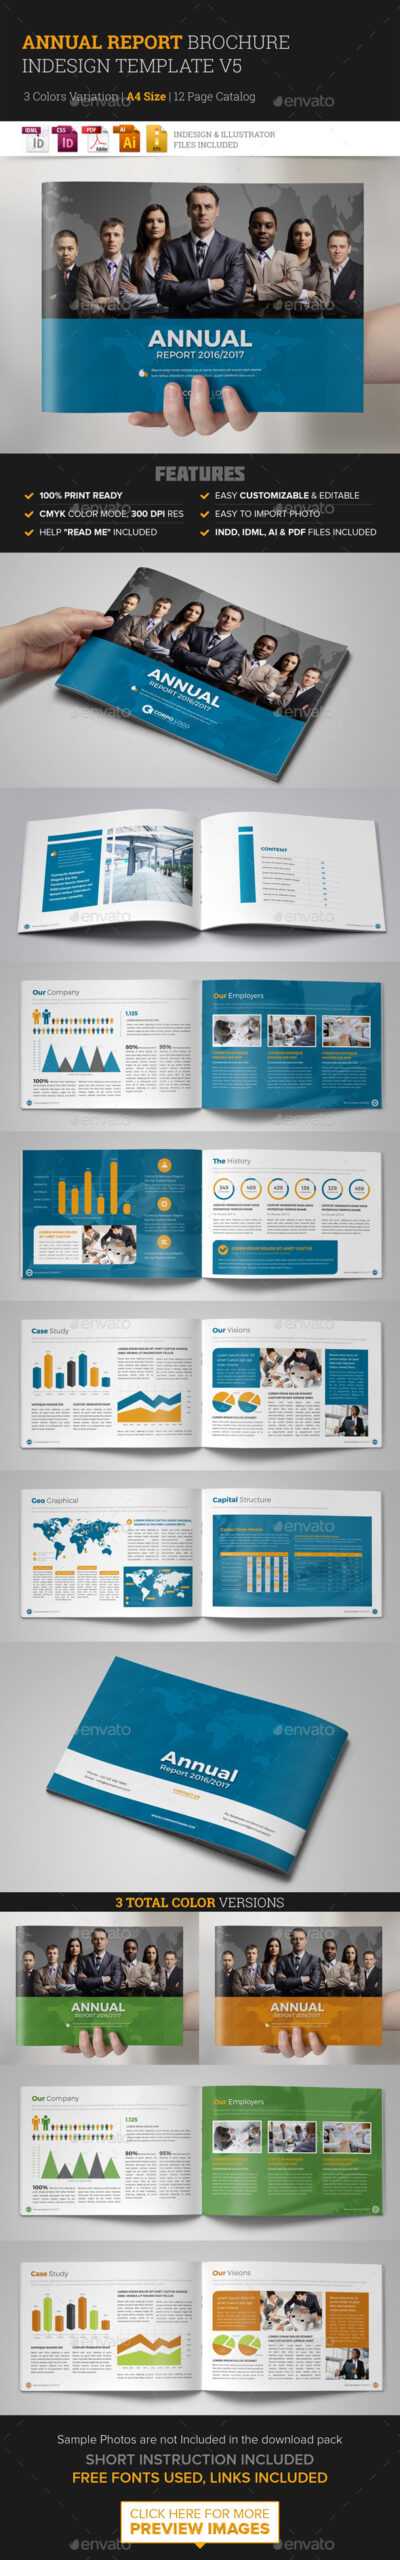 Annual Report Template Indesign Graphics, Designs & Templates For Free Annual Report Template Indesign